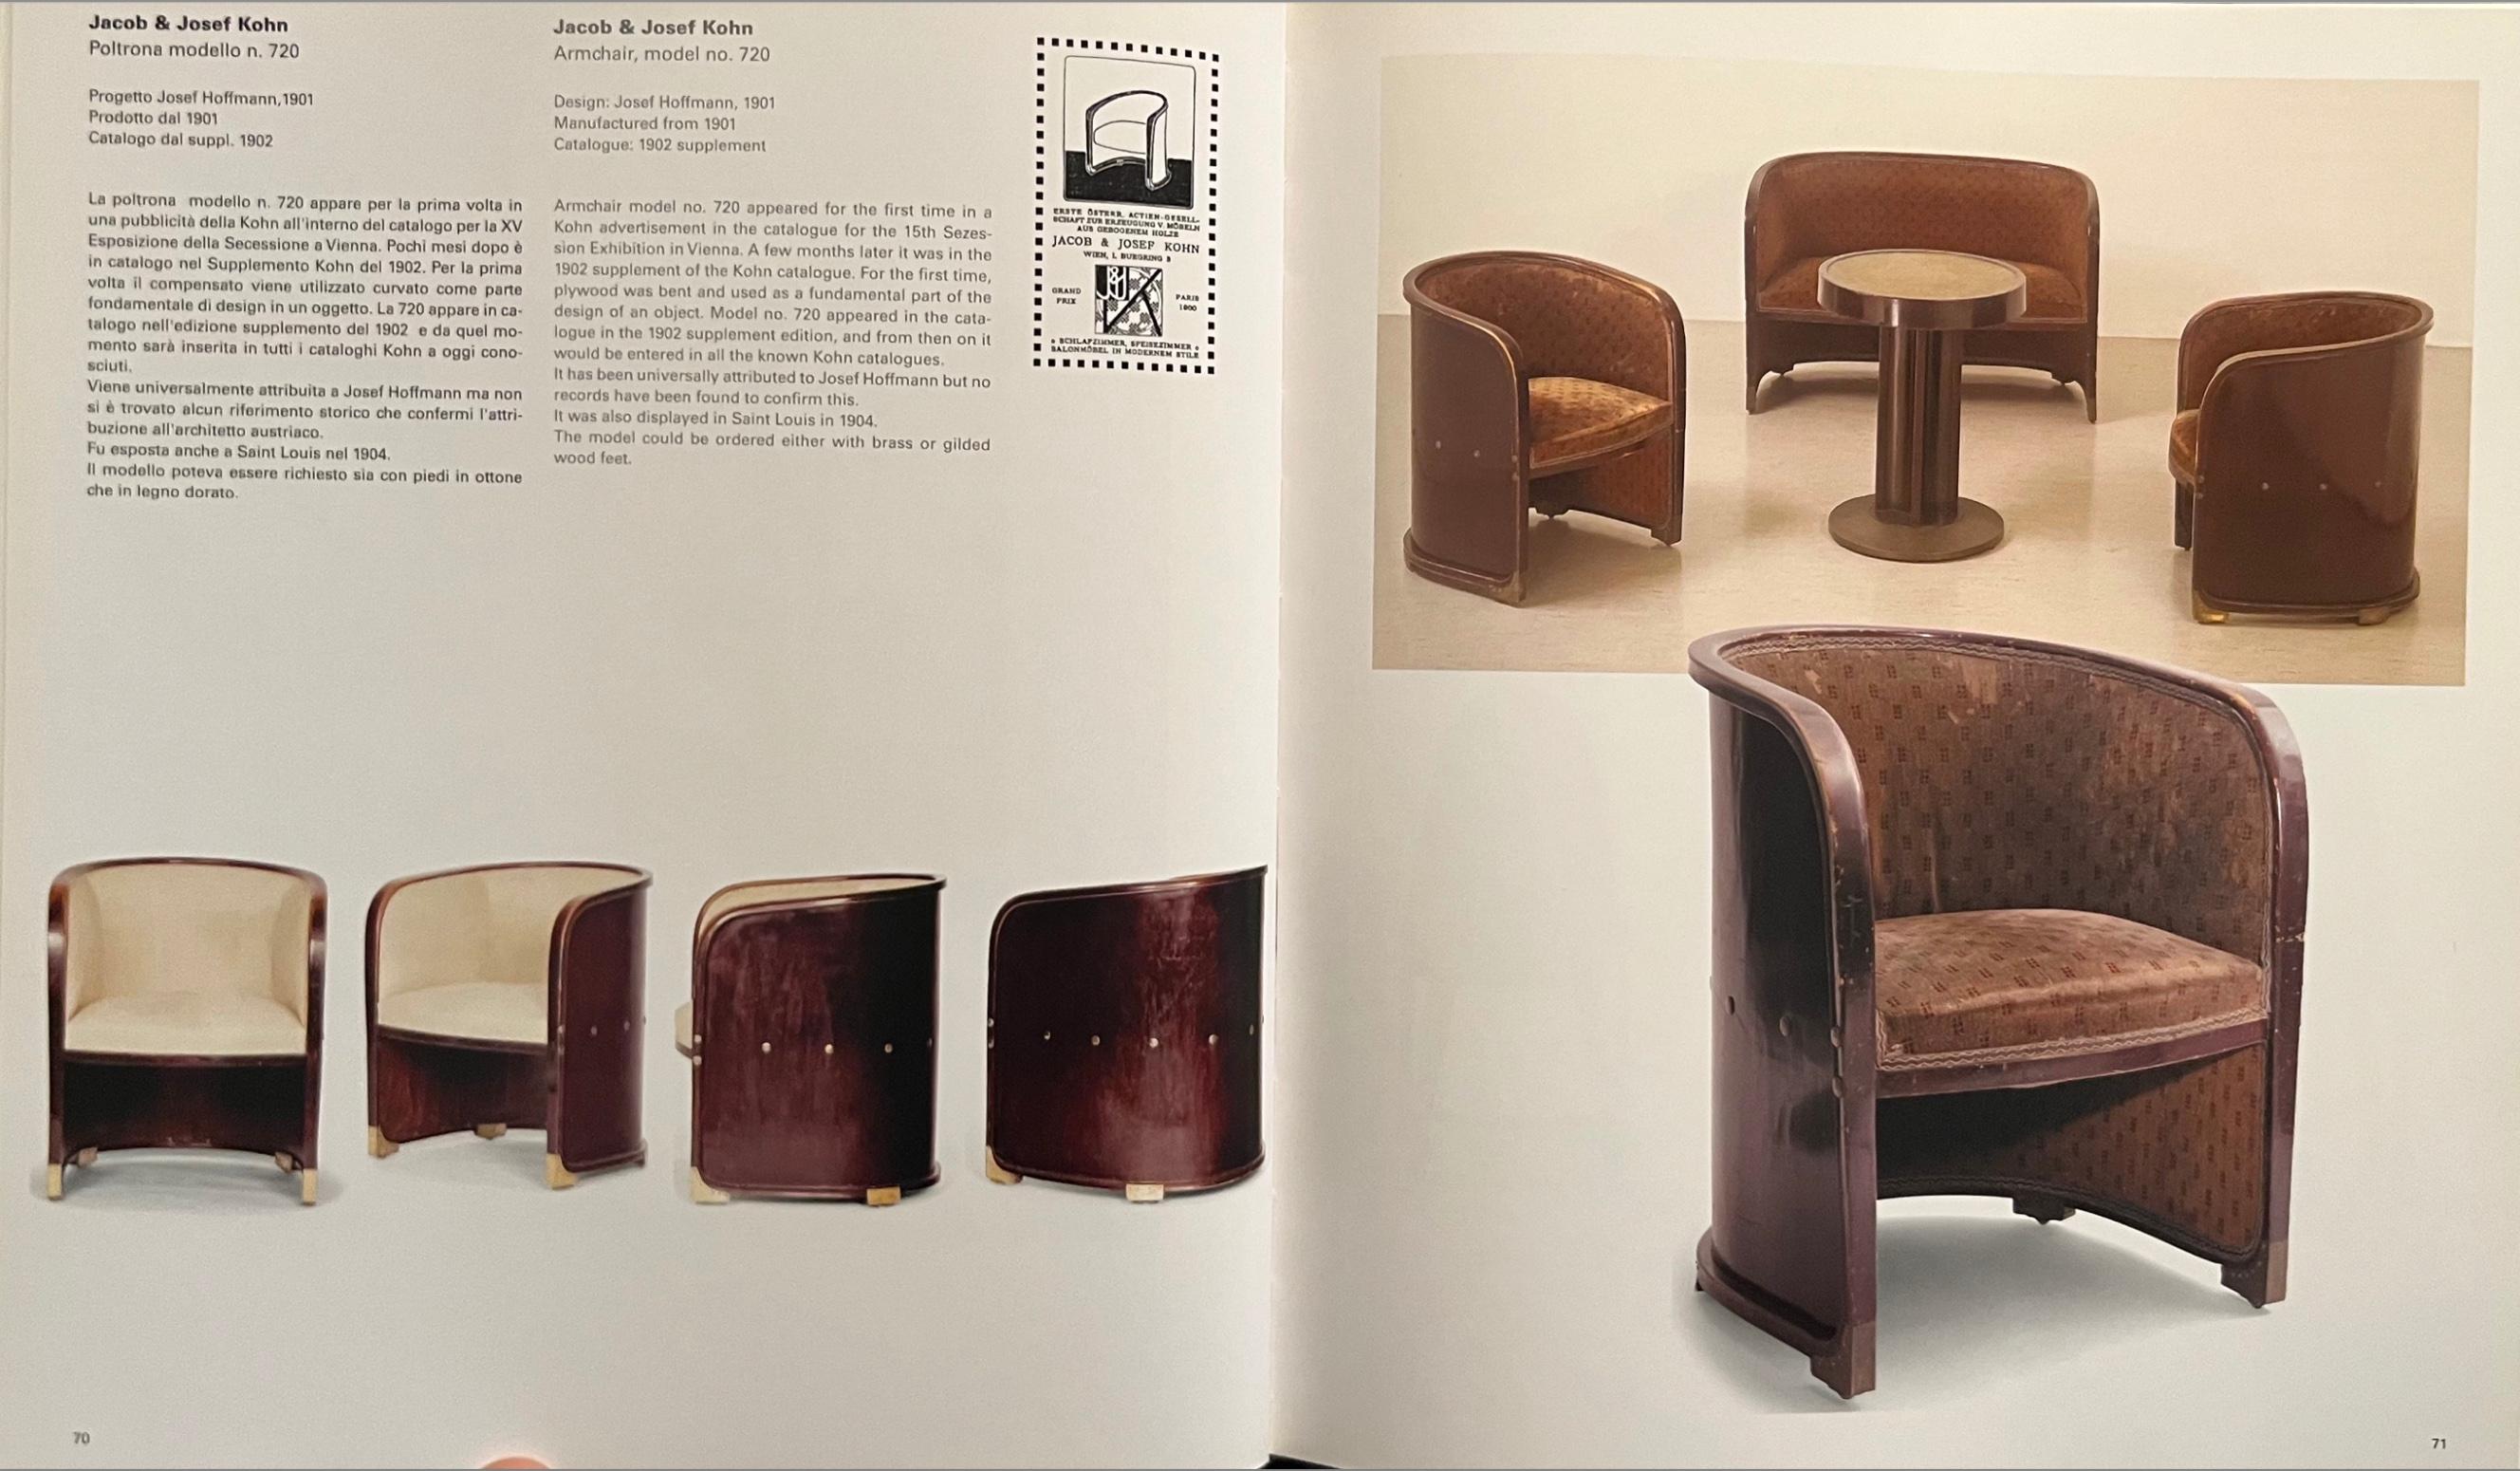 Secession Armchair by Josef Hoffmann (1914), manufactured by Thonet (1919) 2